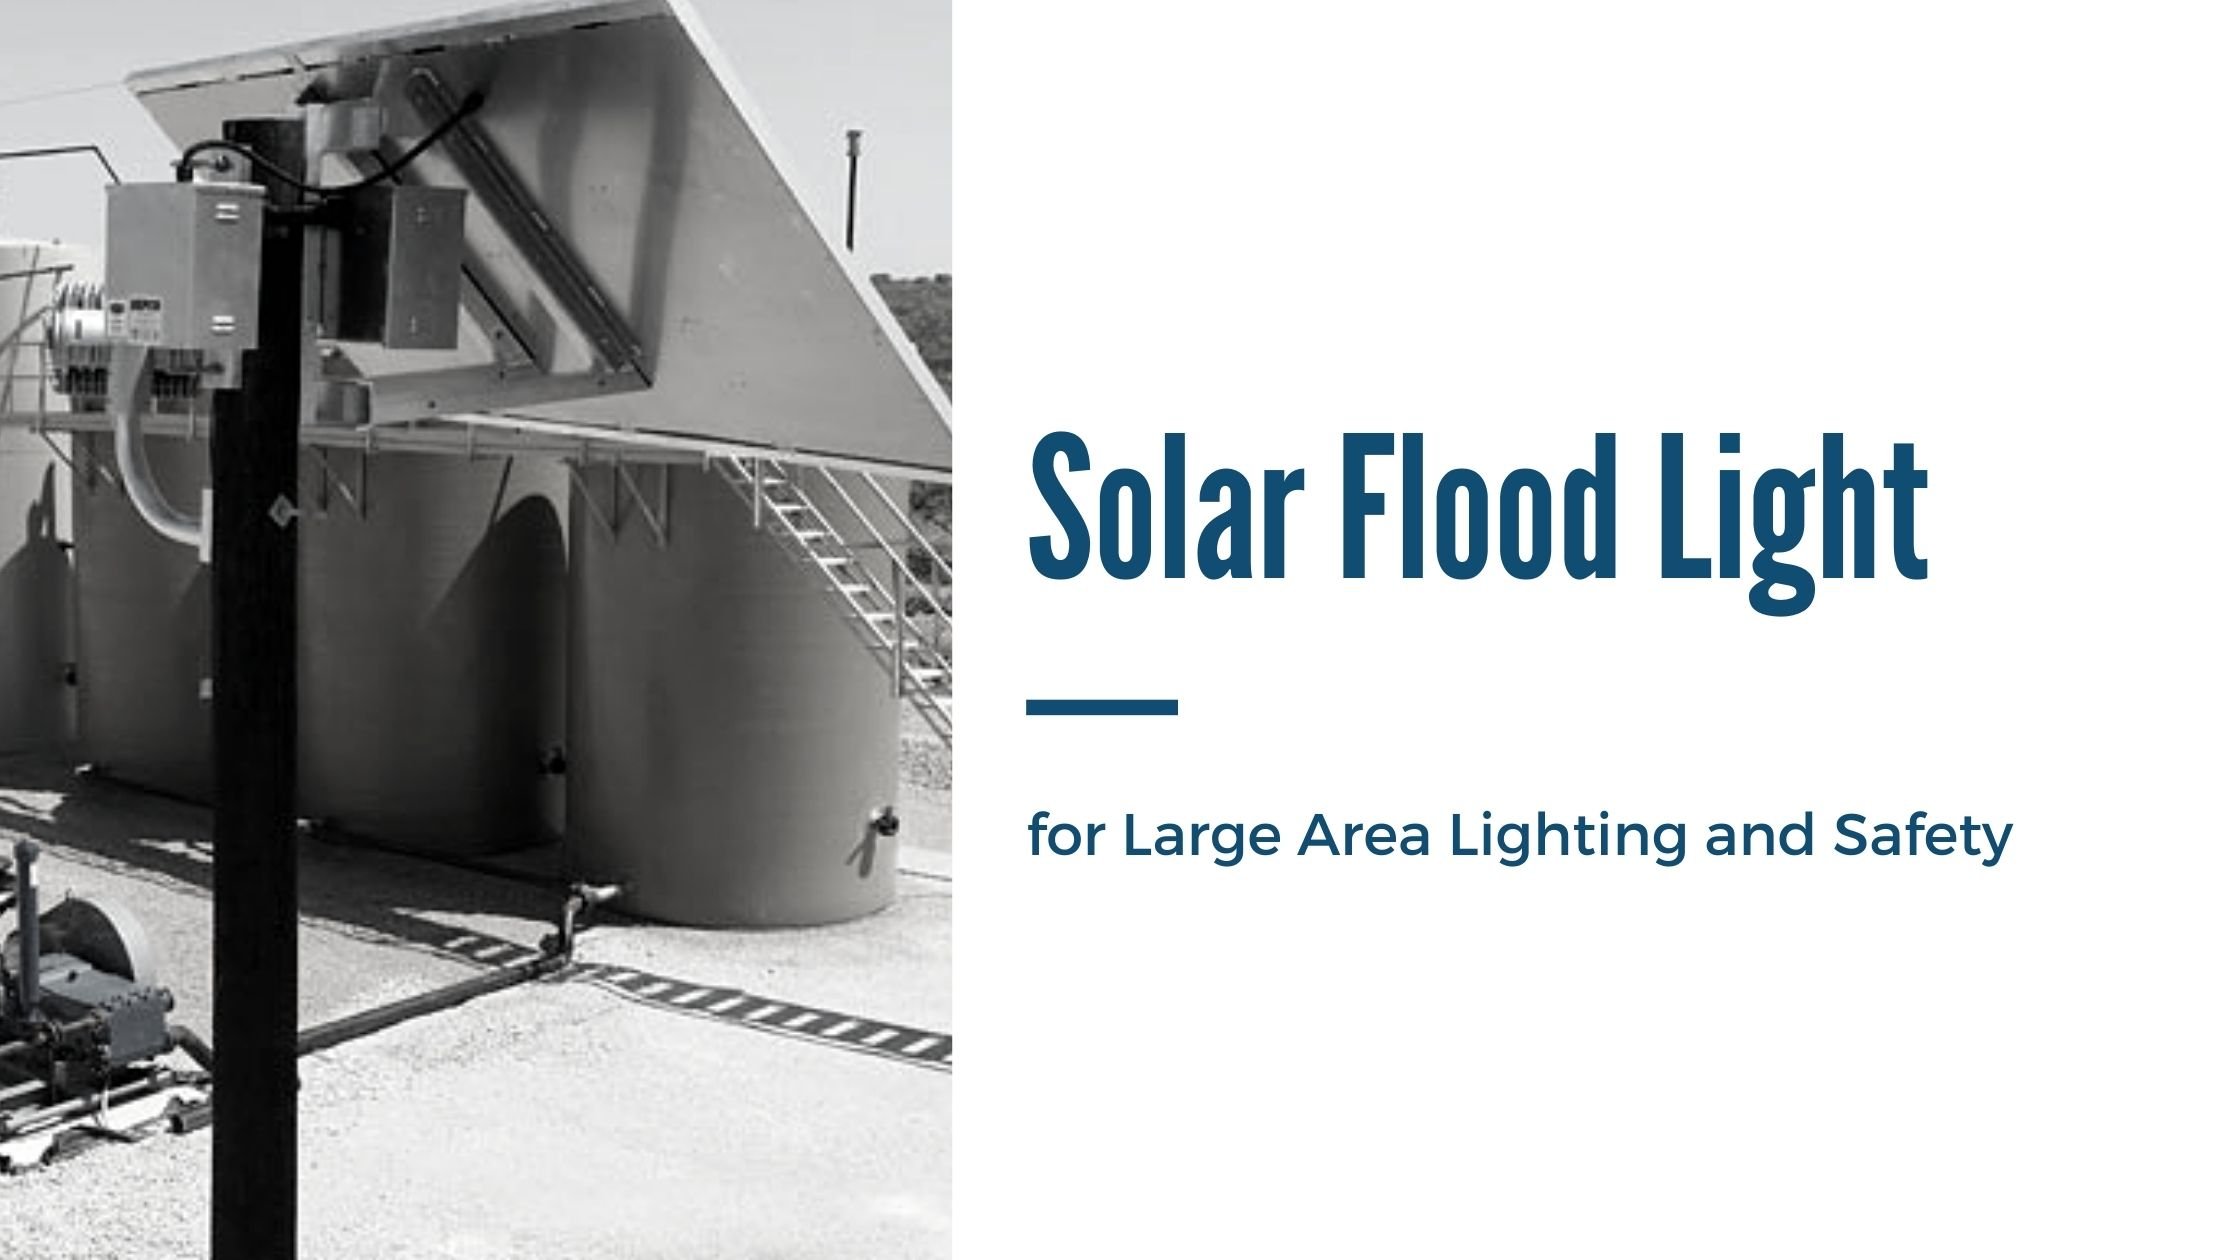 Solar Flood Light for Large Area Lighting and Safety